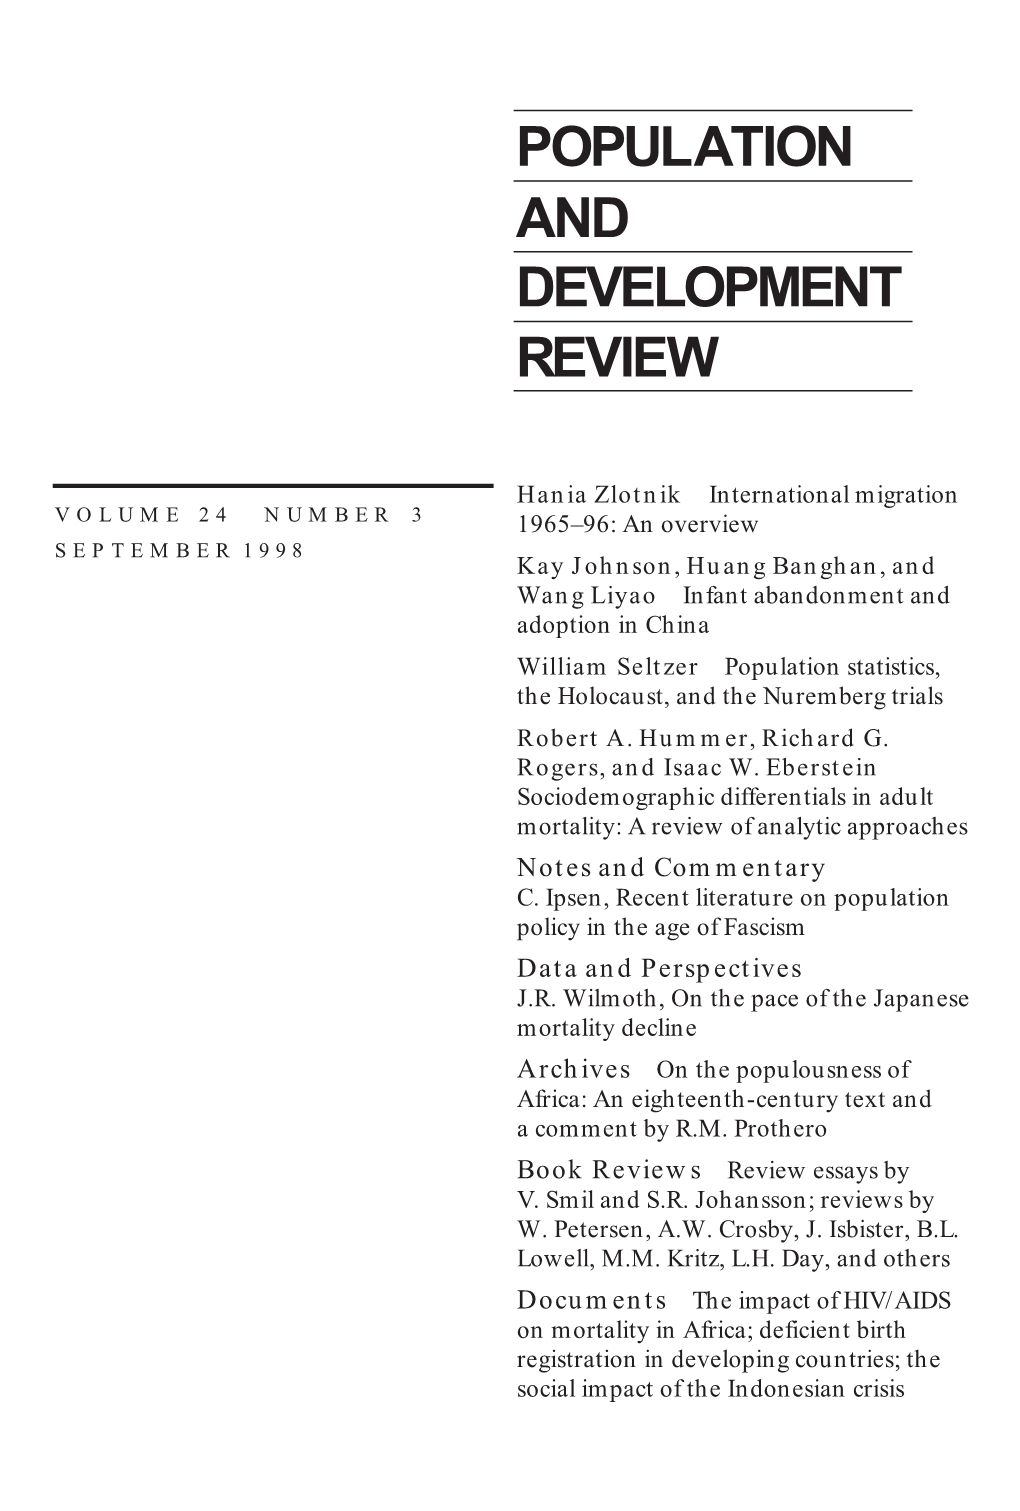 Population and Development Review, Volume 24, Number 3